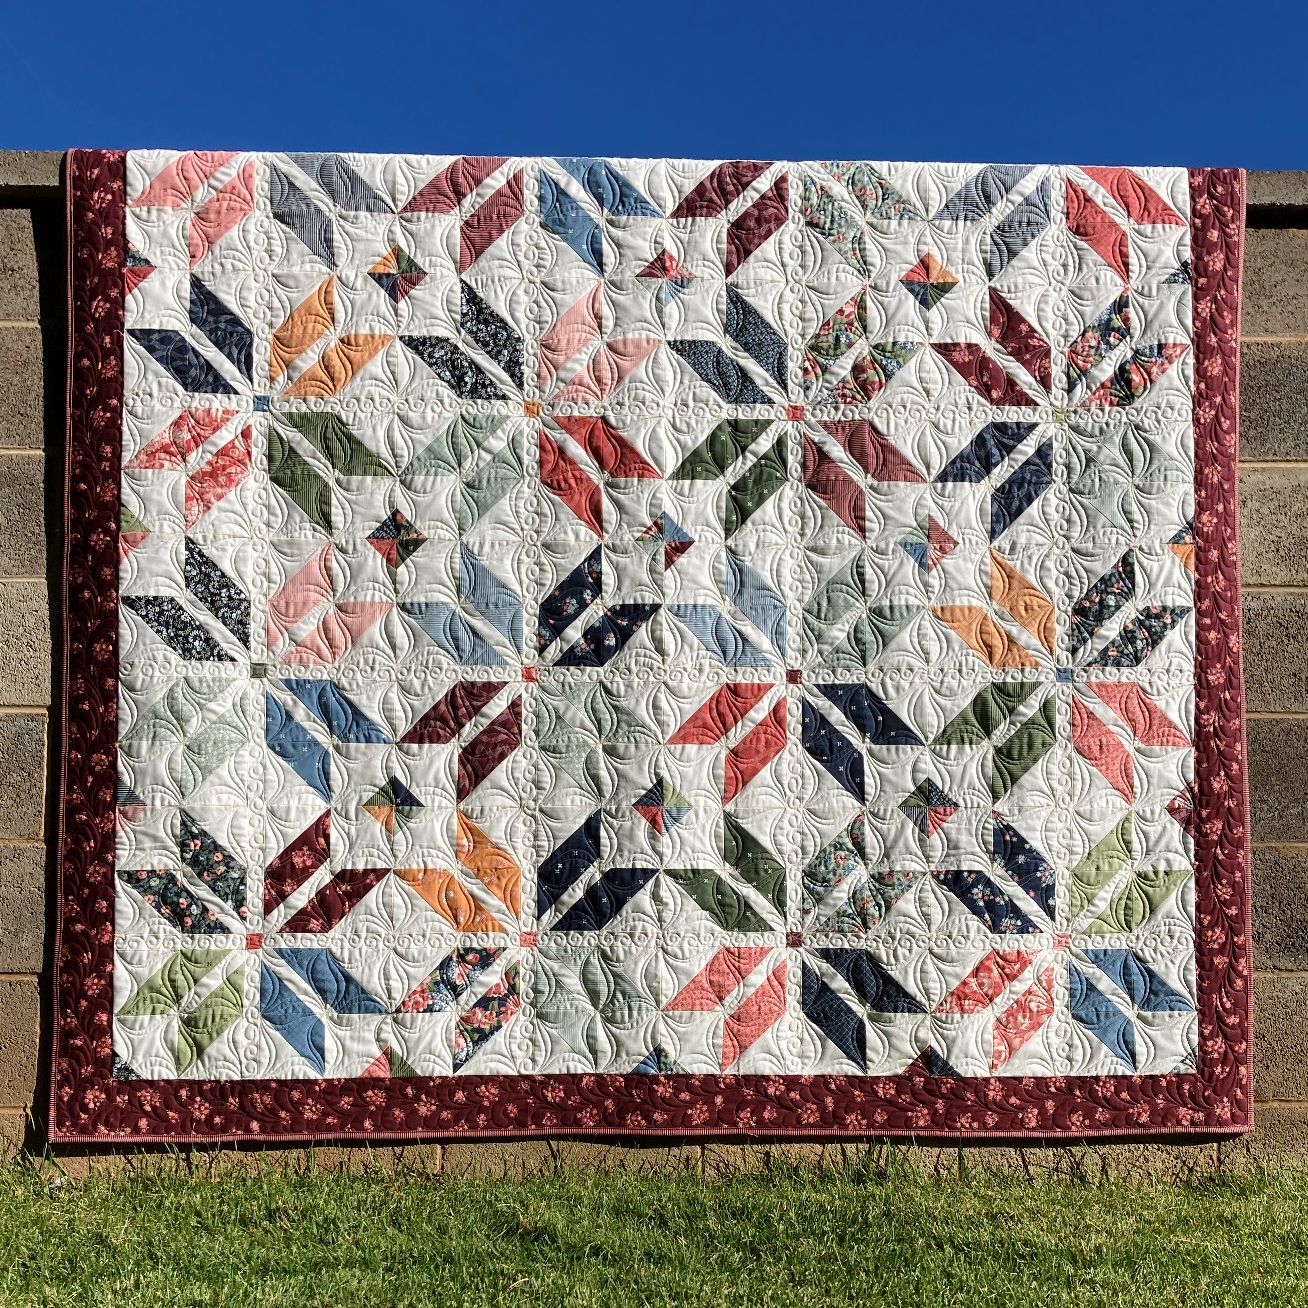 Happy Quilting: More Happy Quilting Patterns with a New Look!!